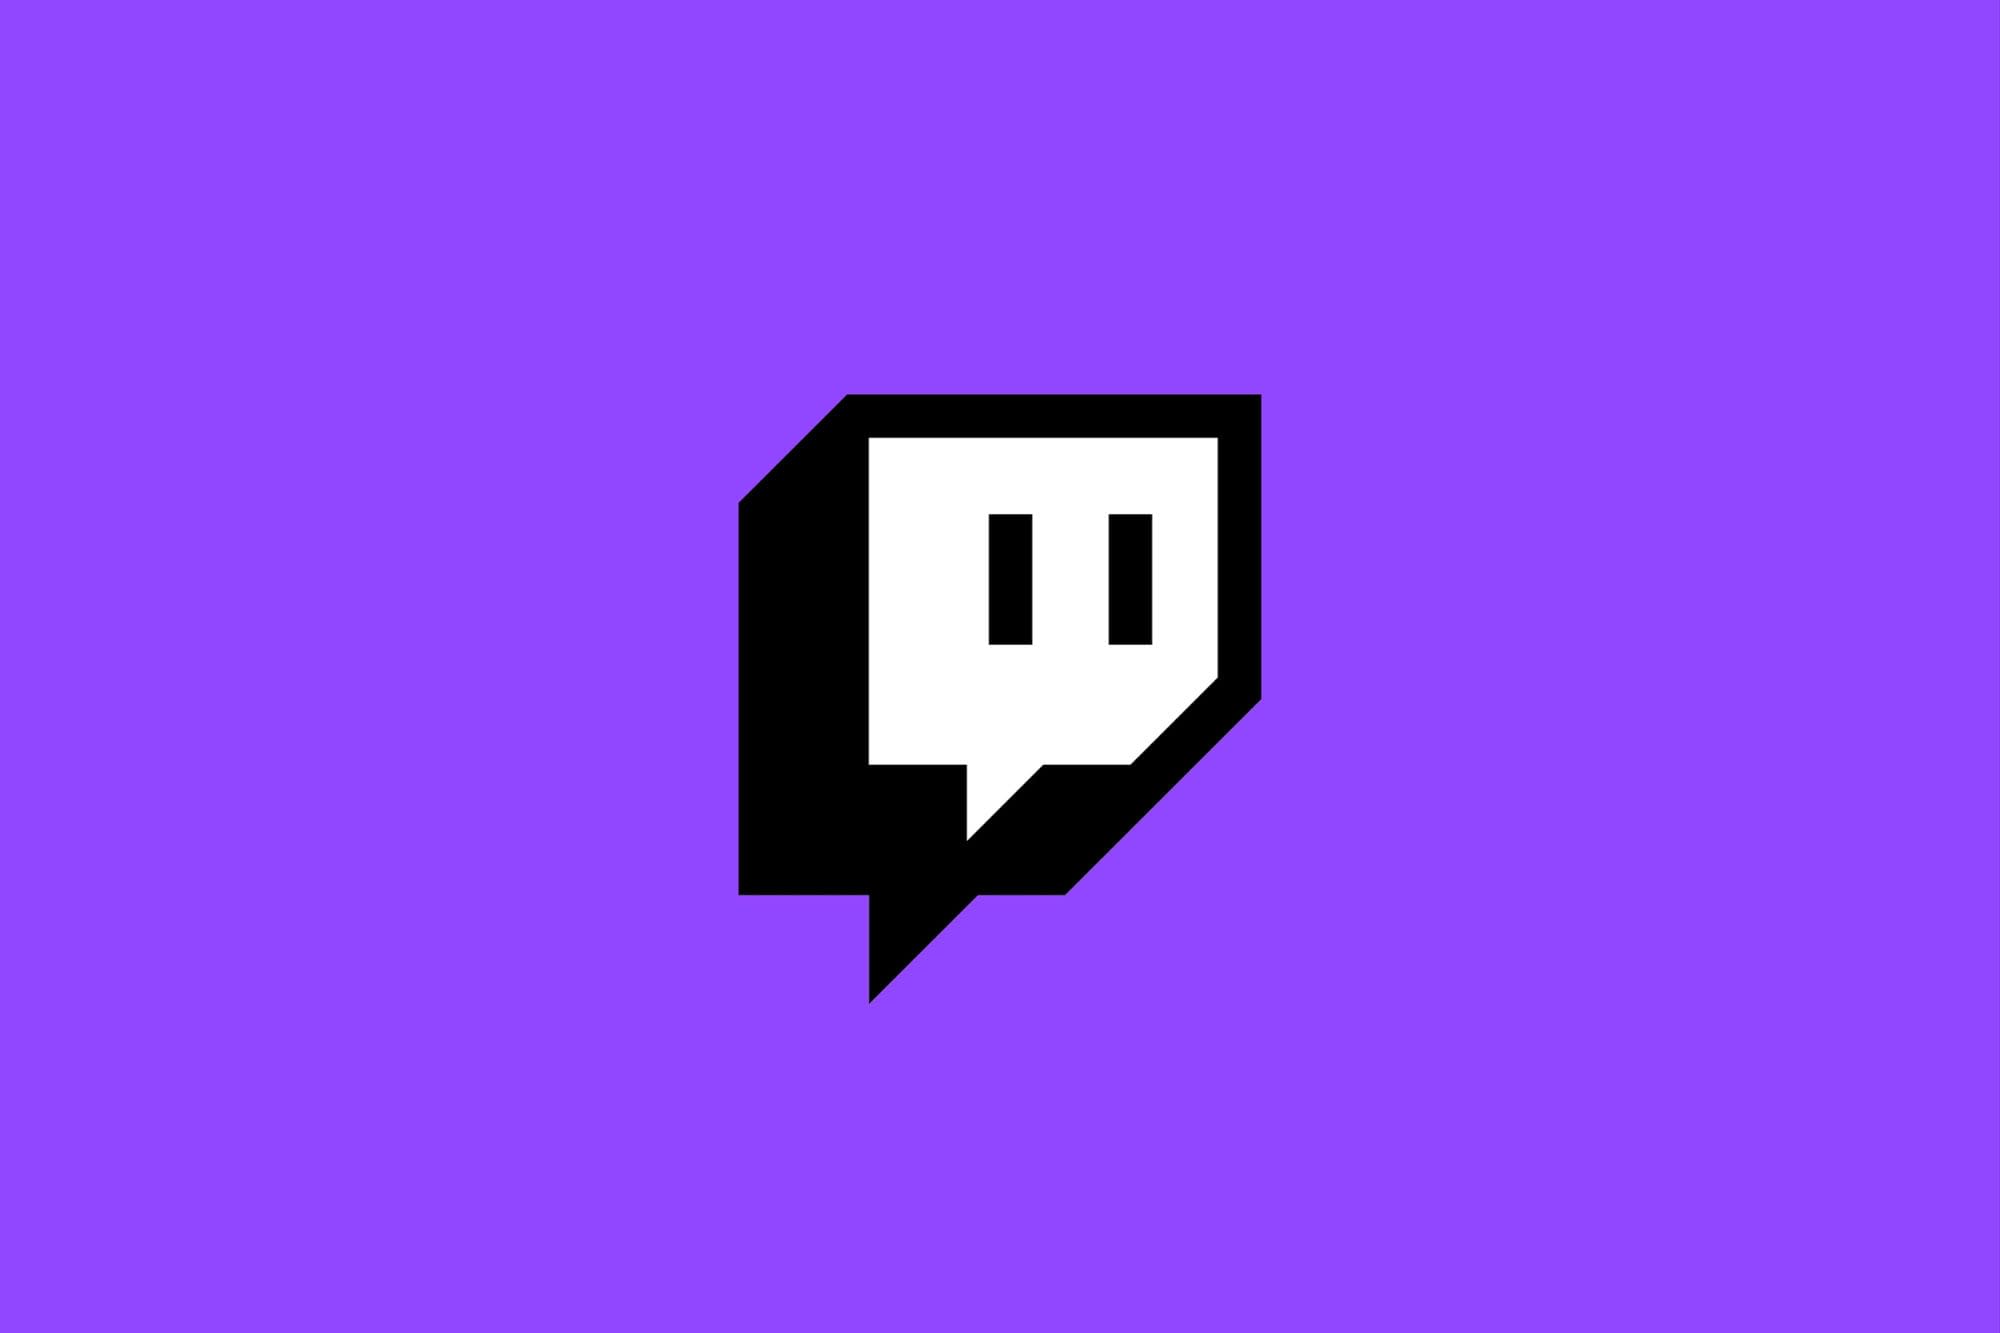 The Twitch icon from the logo, circa 2019. It's a speech bubble with eyes in it.